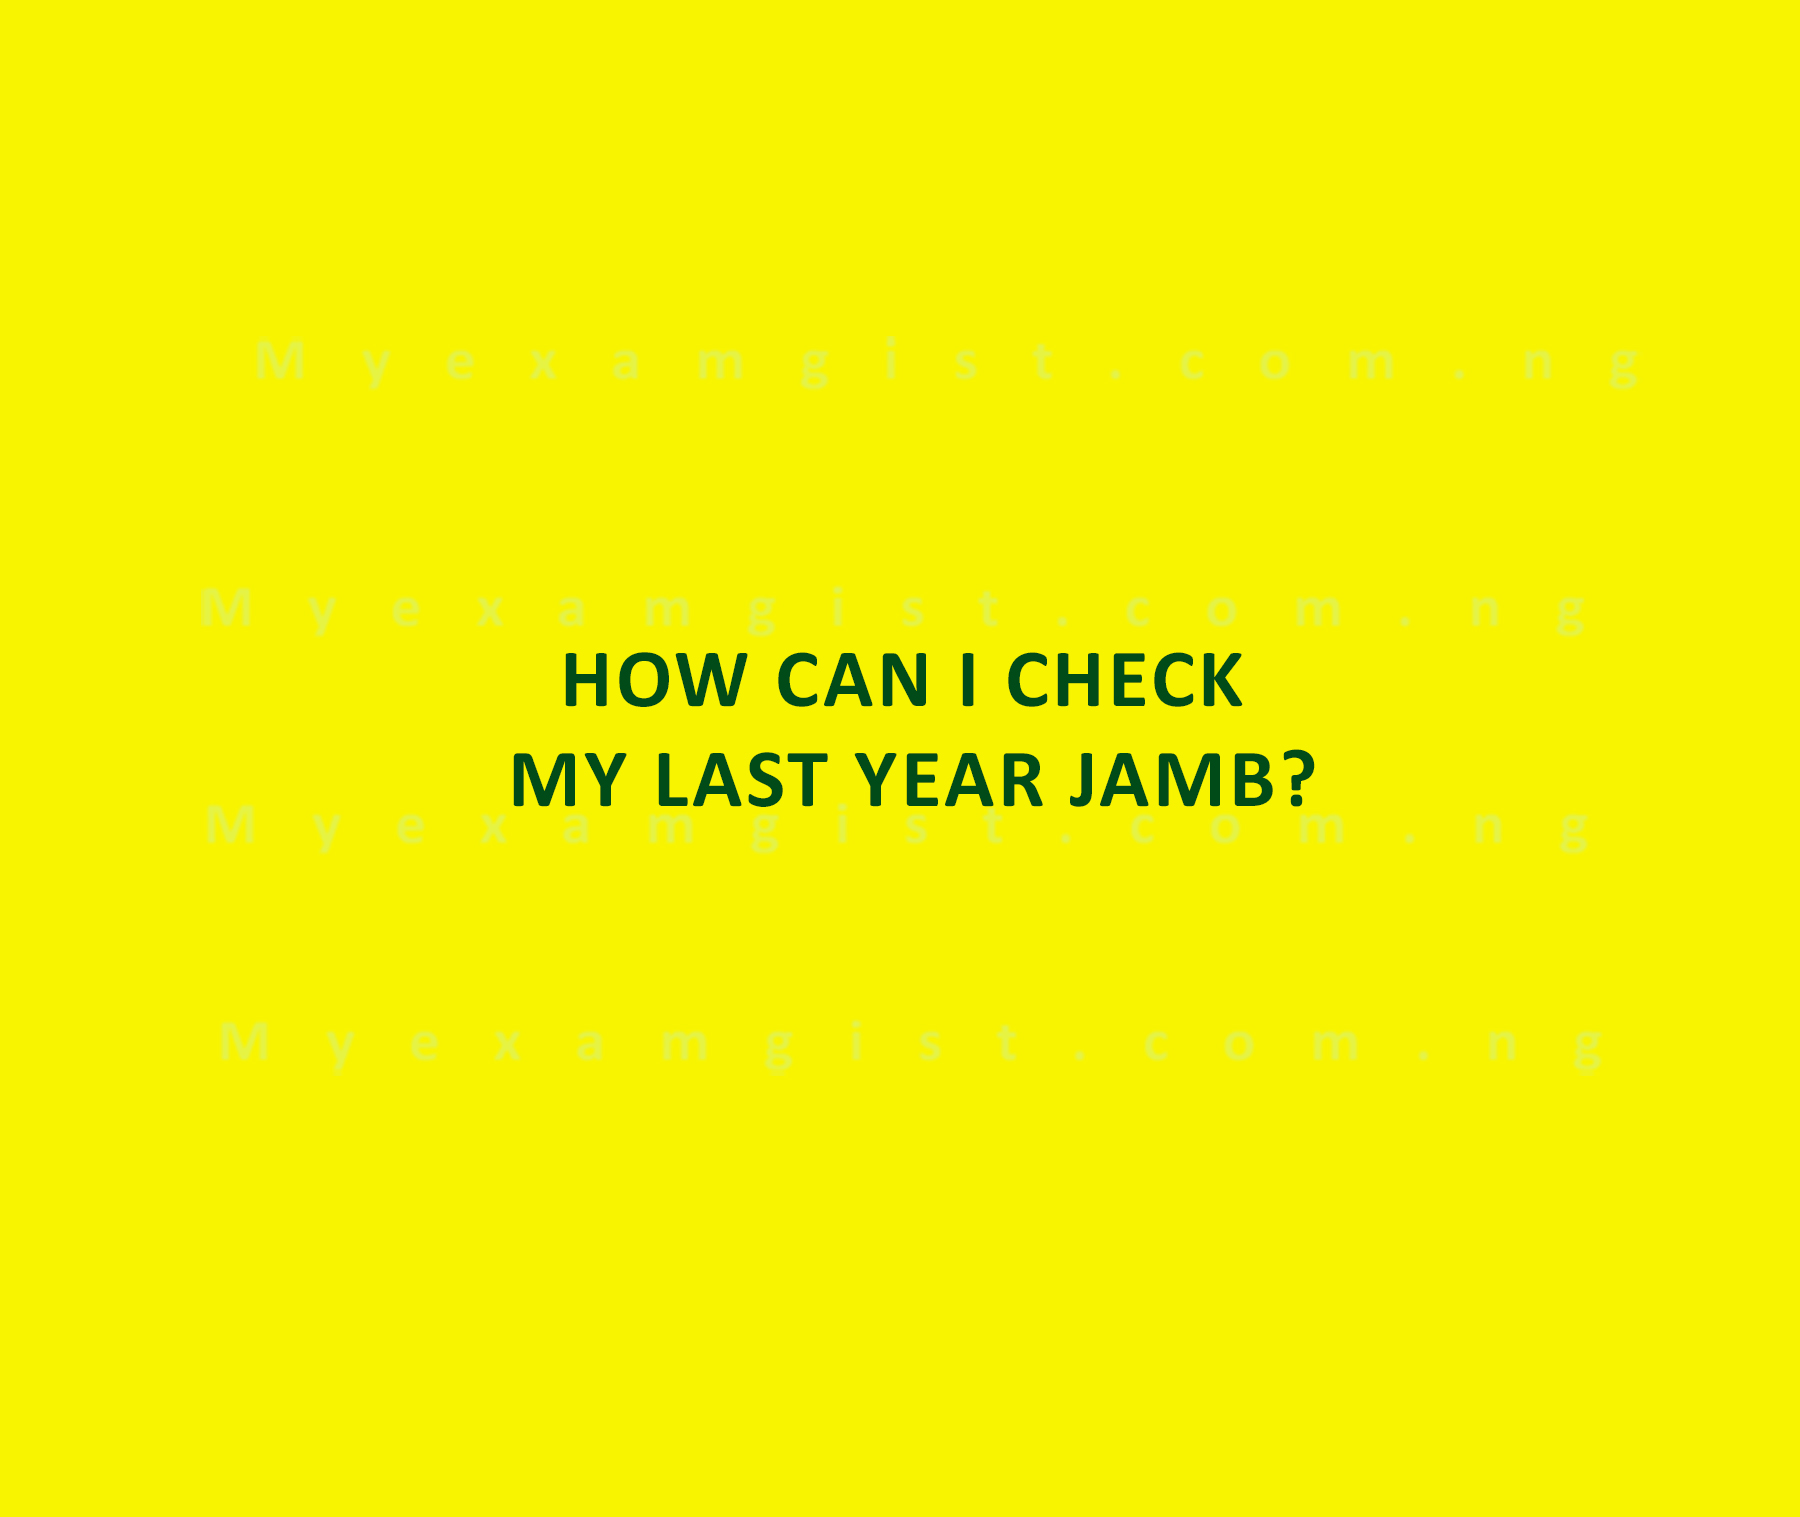 How can I check my last year JAMB?